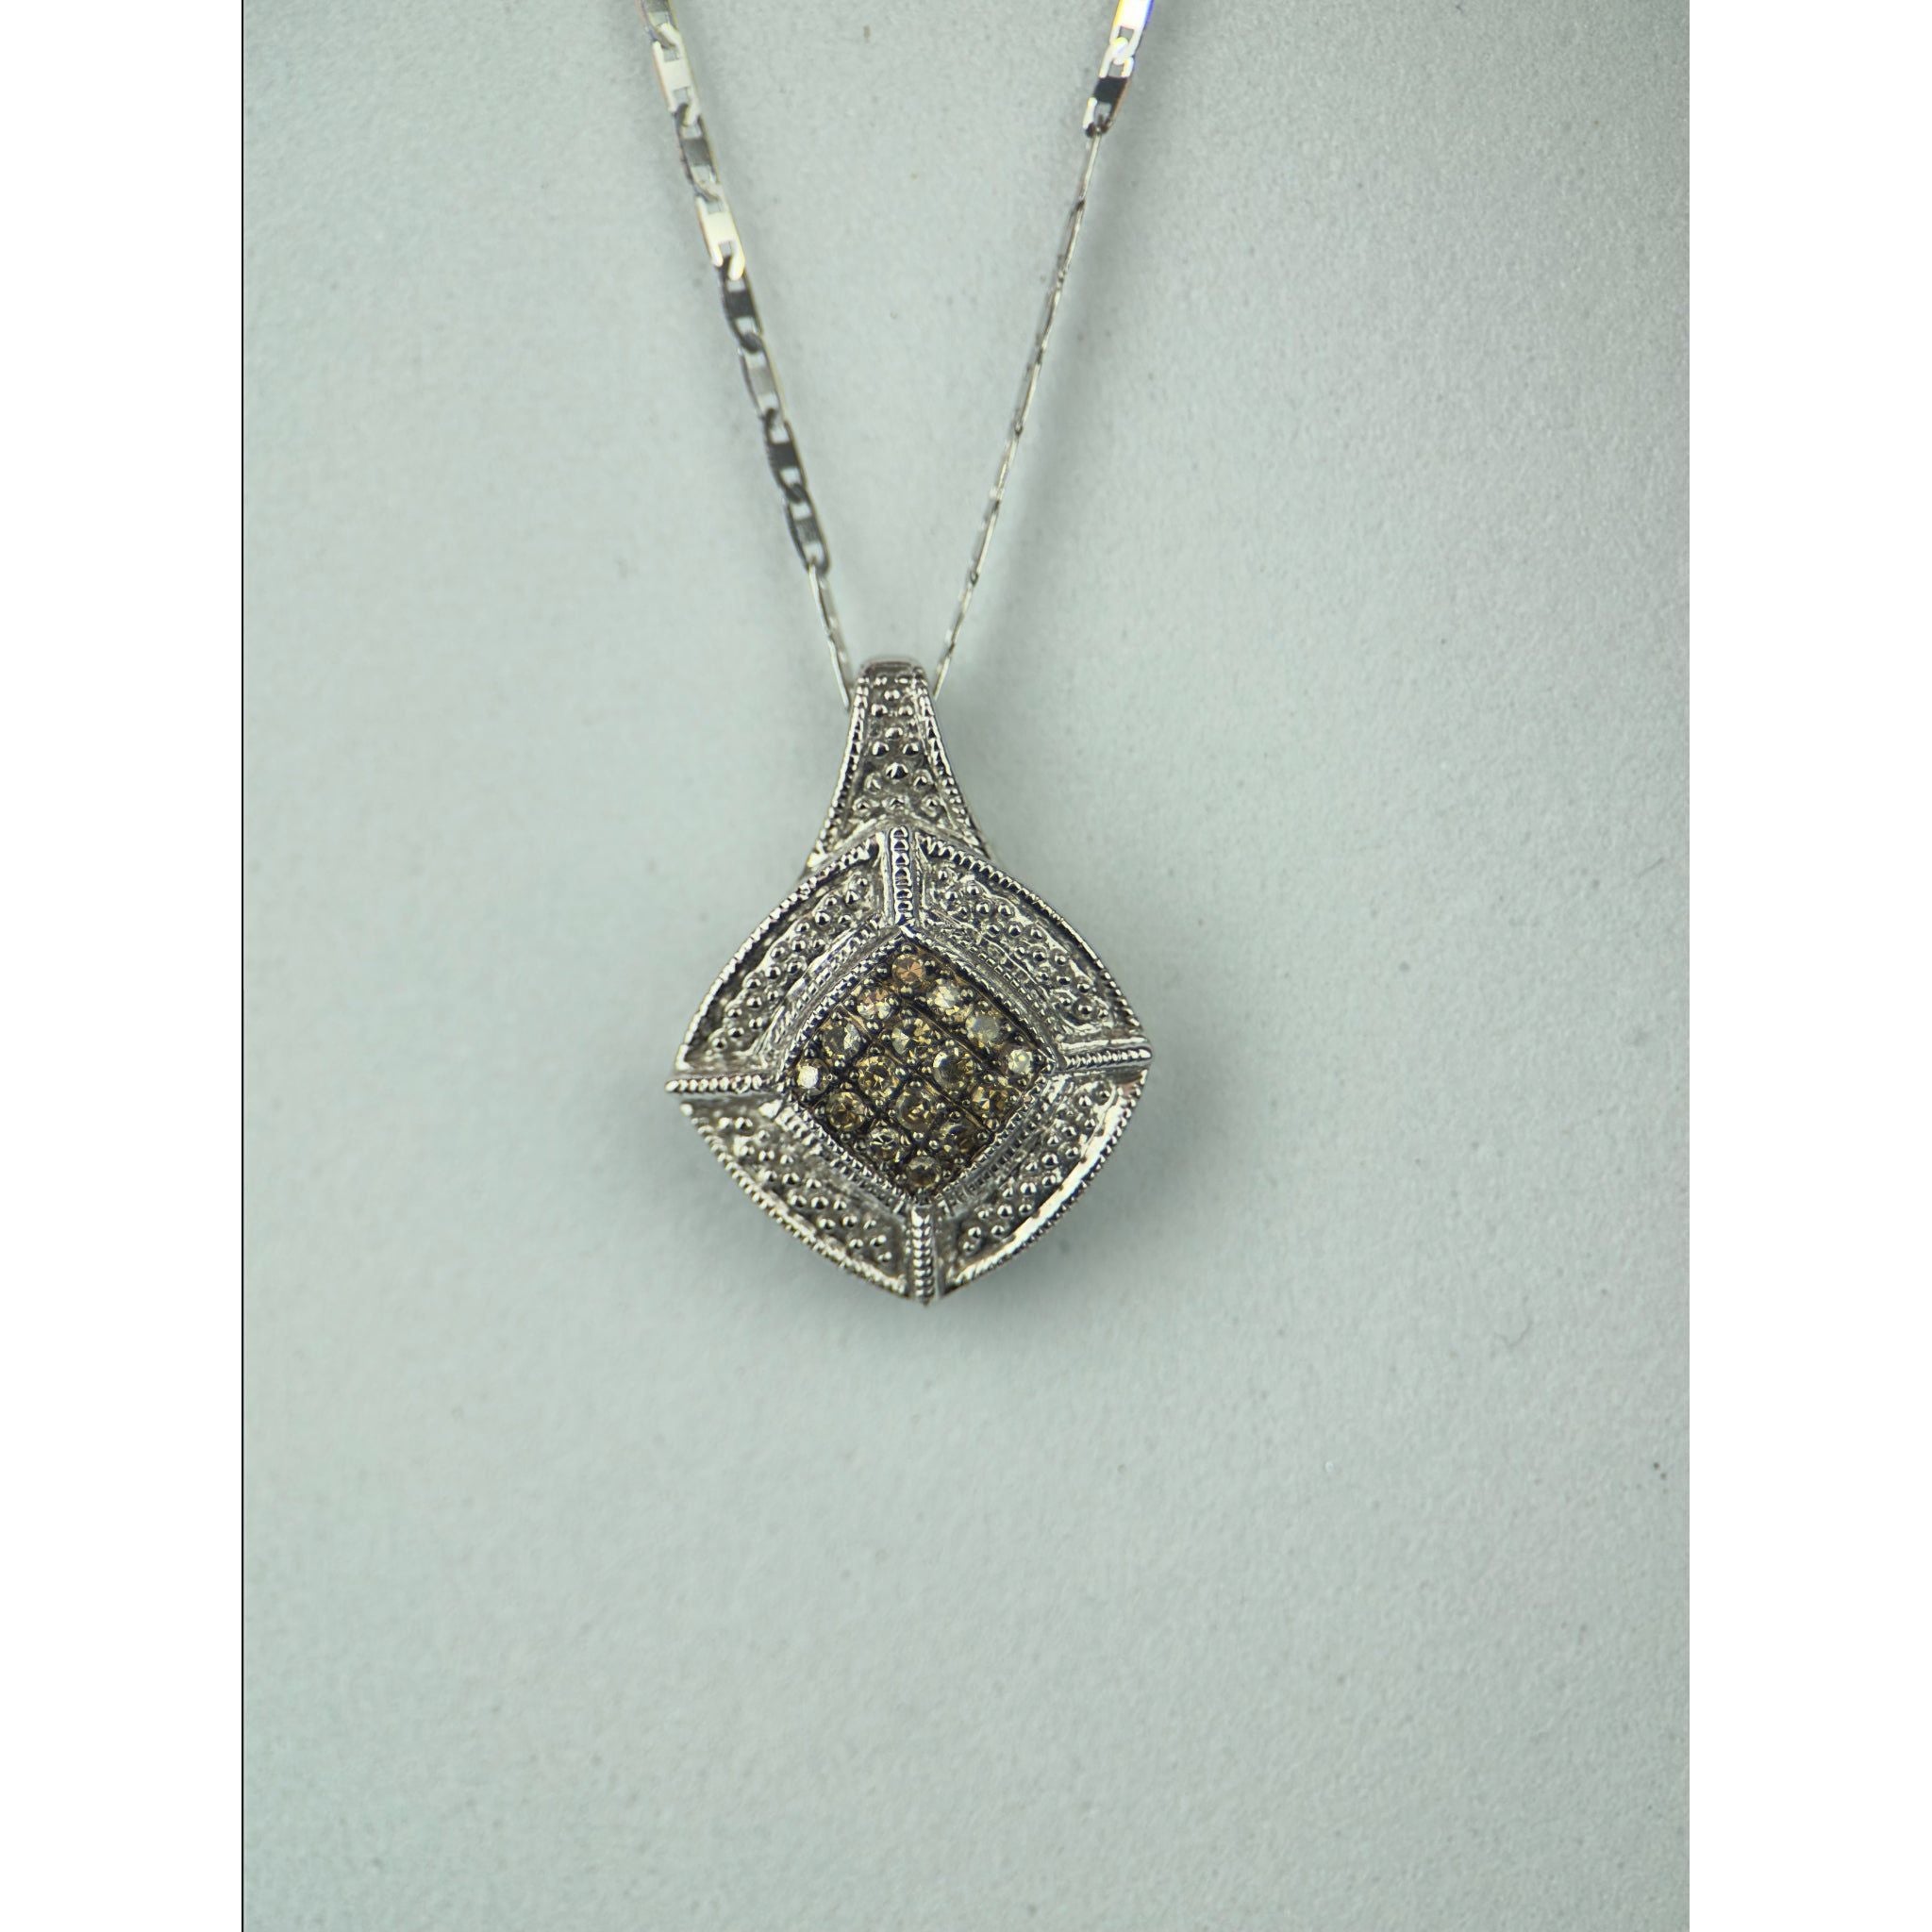 DR2264 - 10K White Gold - Chocolate Diamond - Pendant and Chain